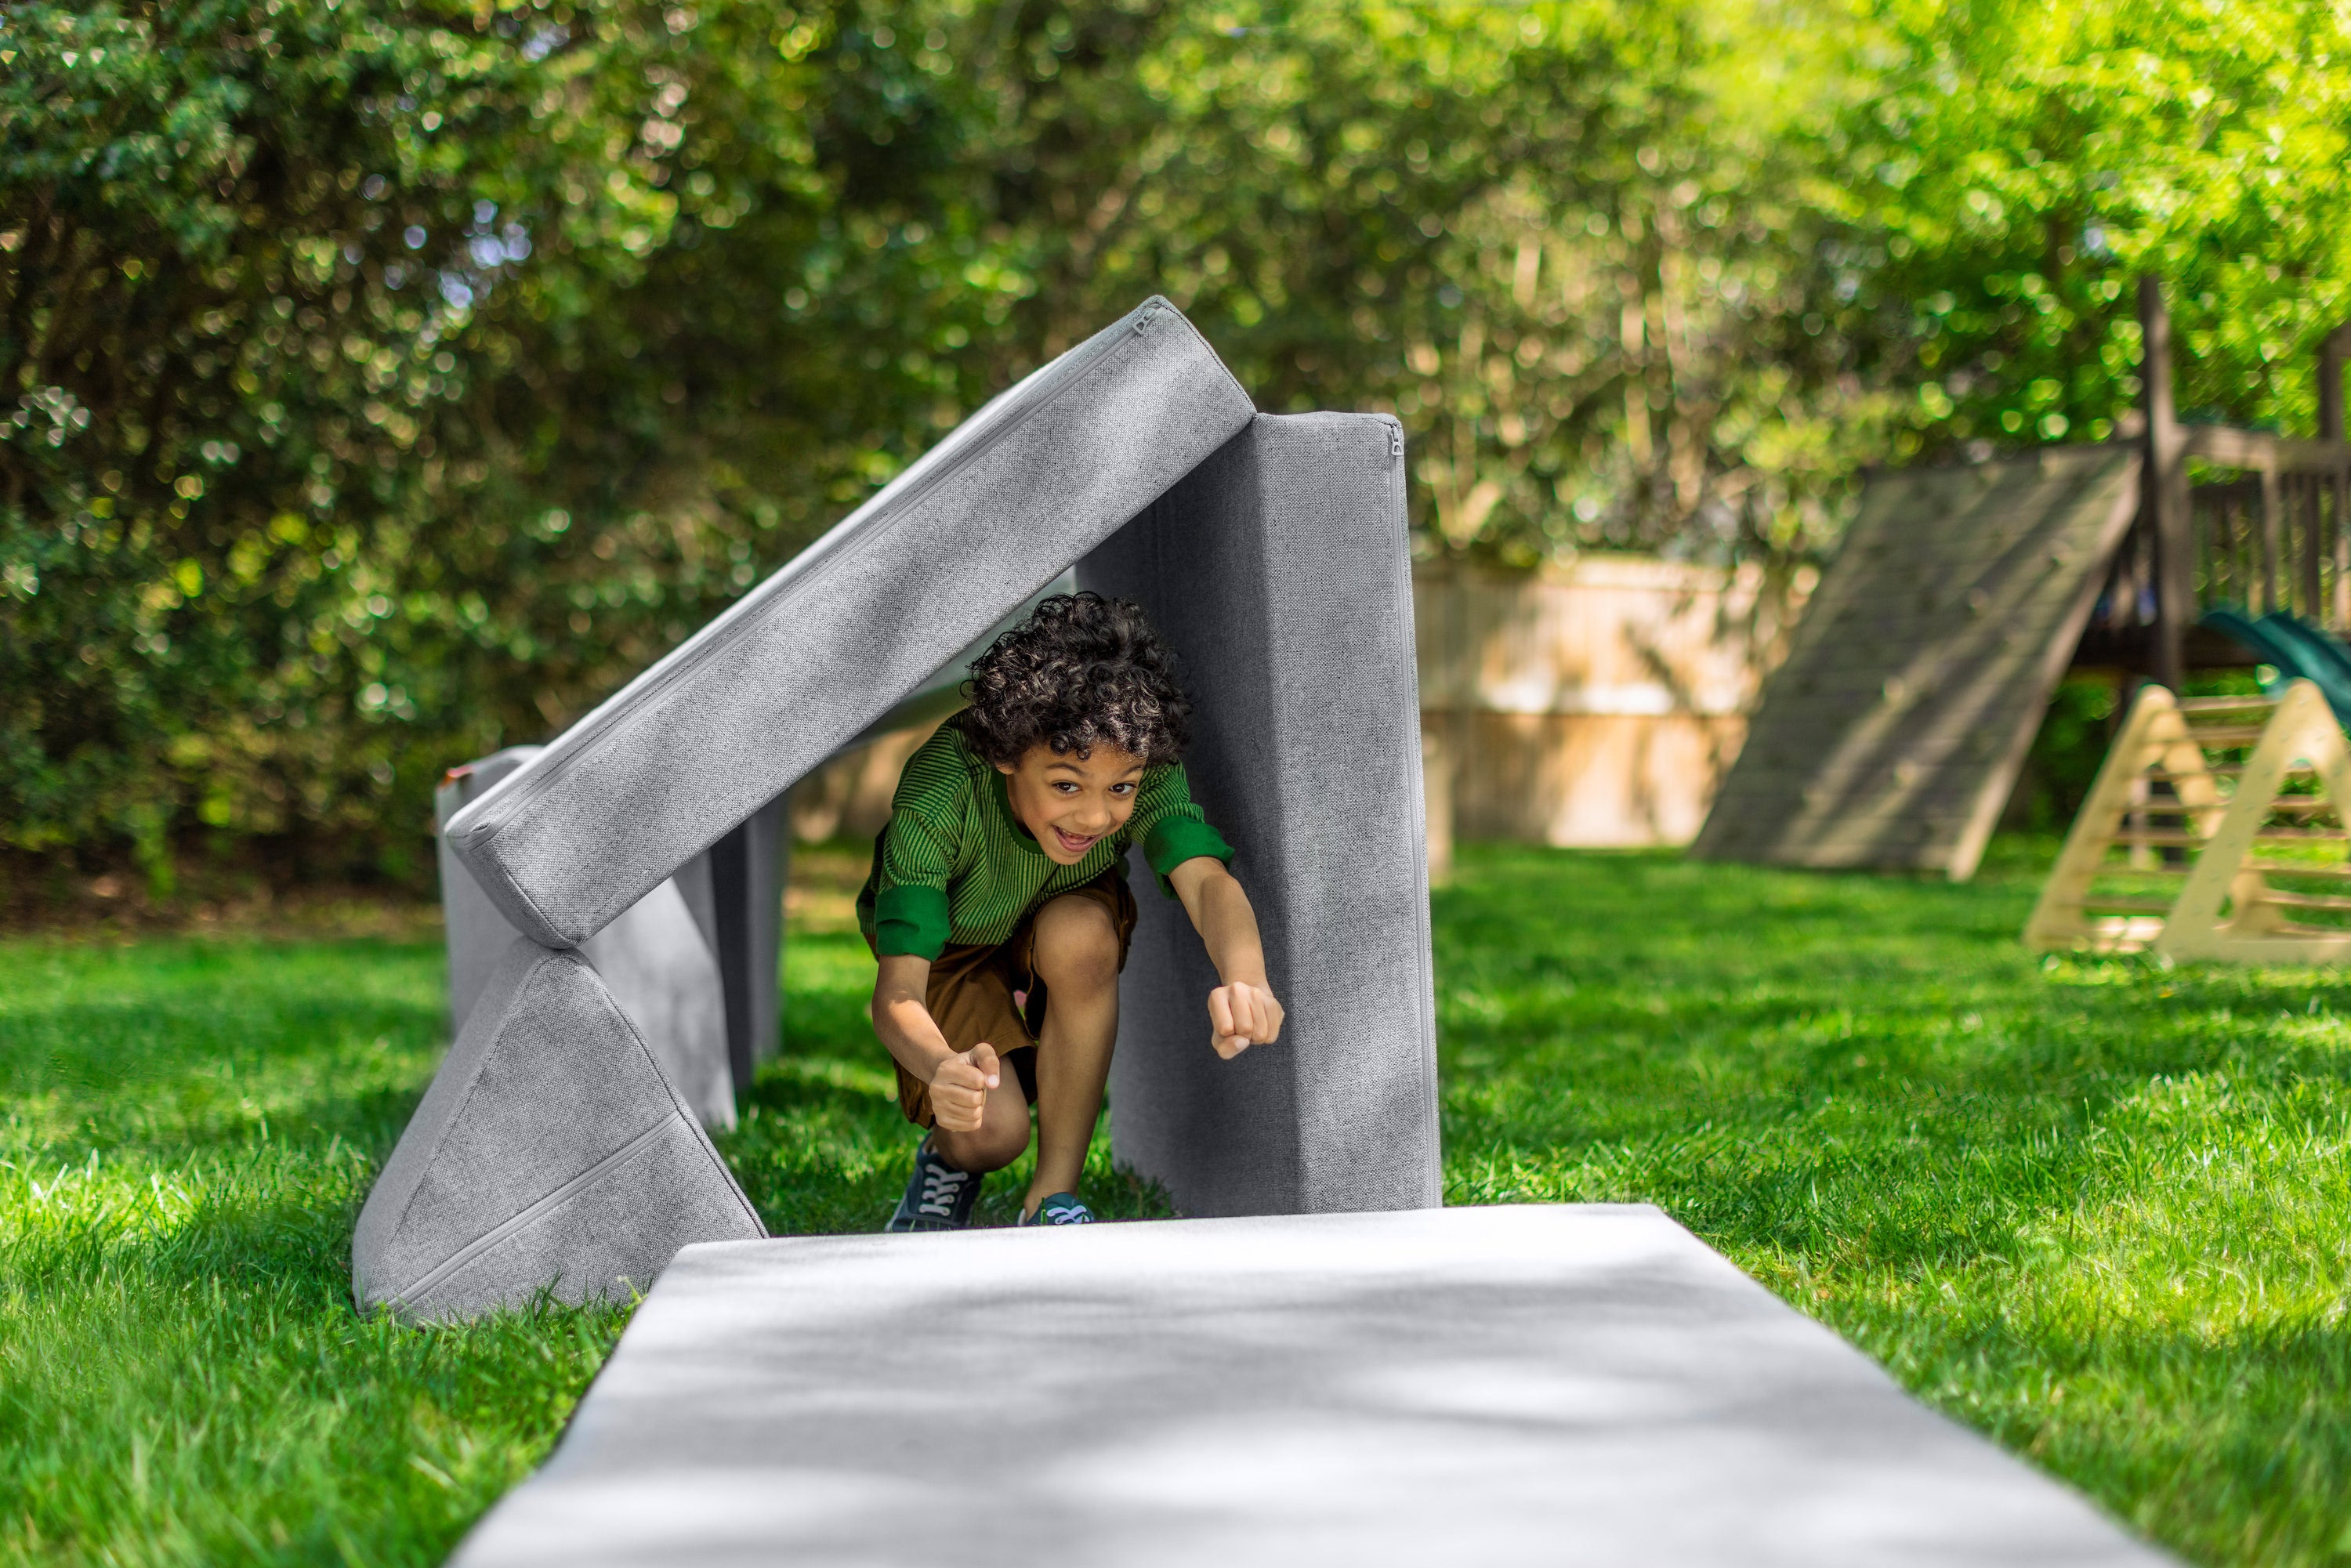 A child runs through a Nugget obstacle course tunnel on a bright green lawn